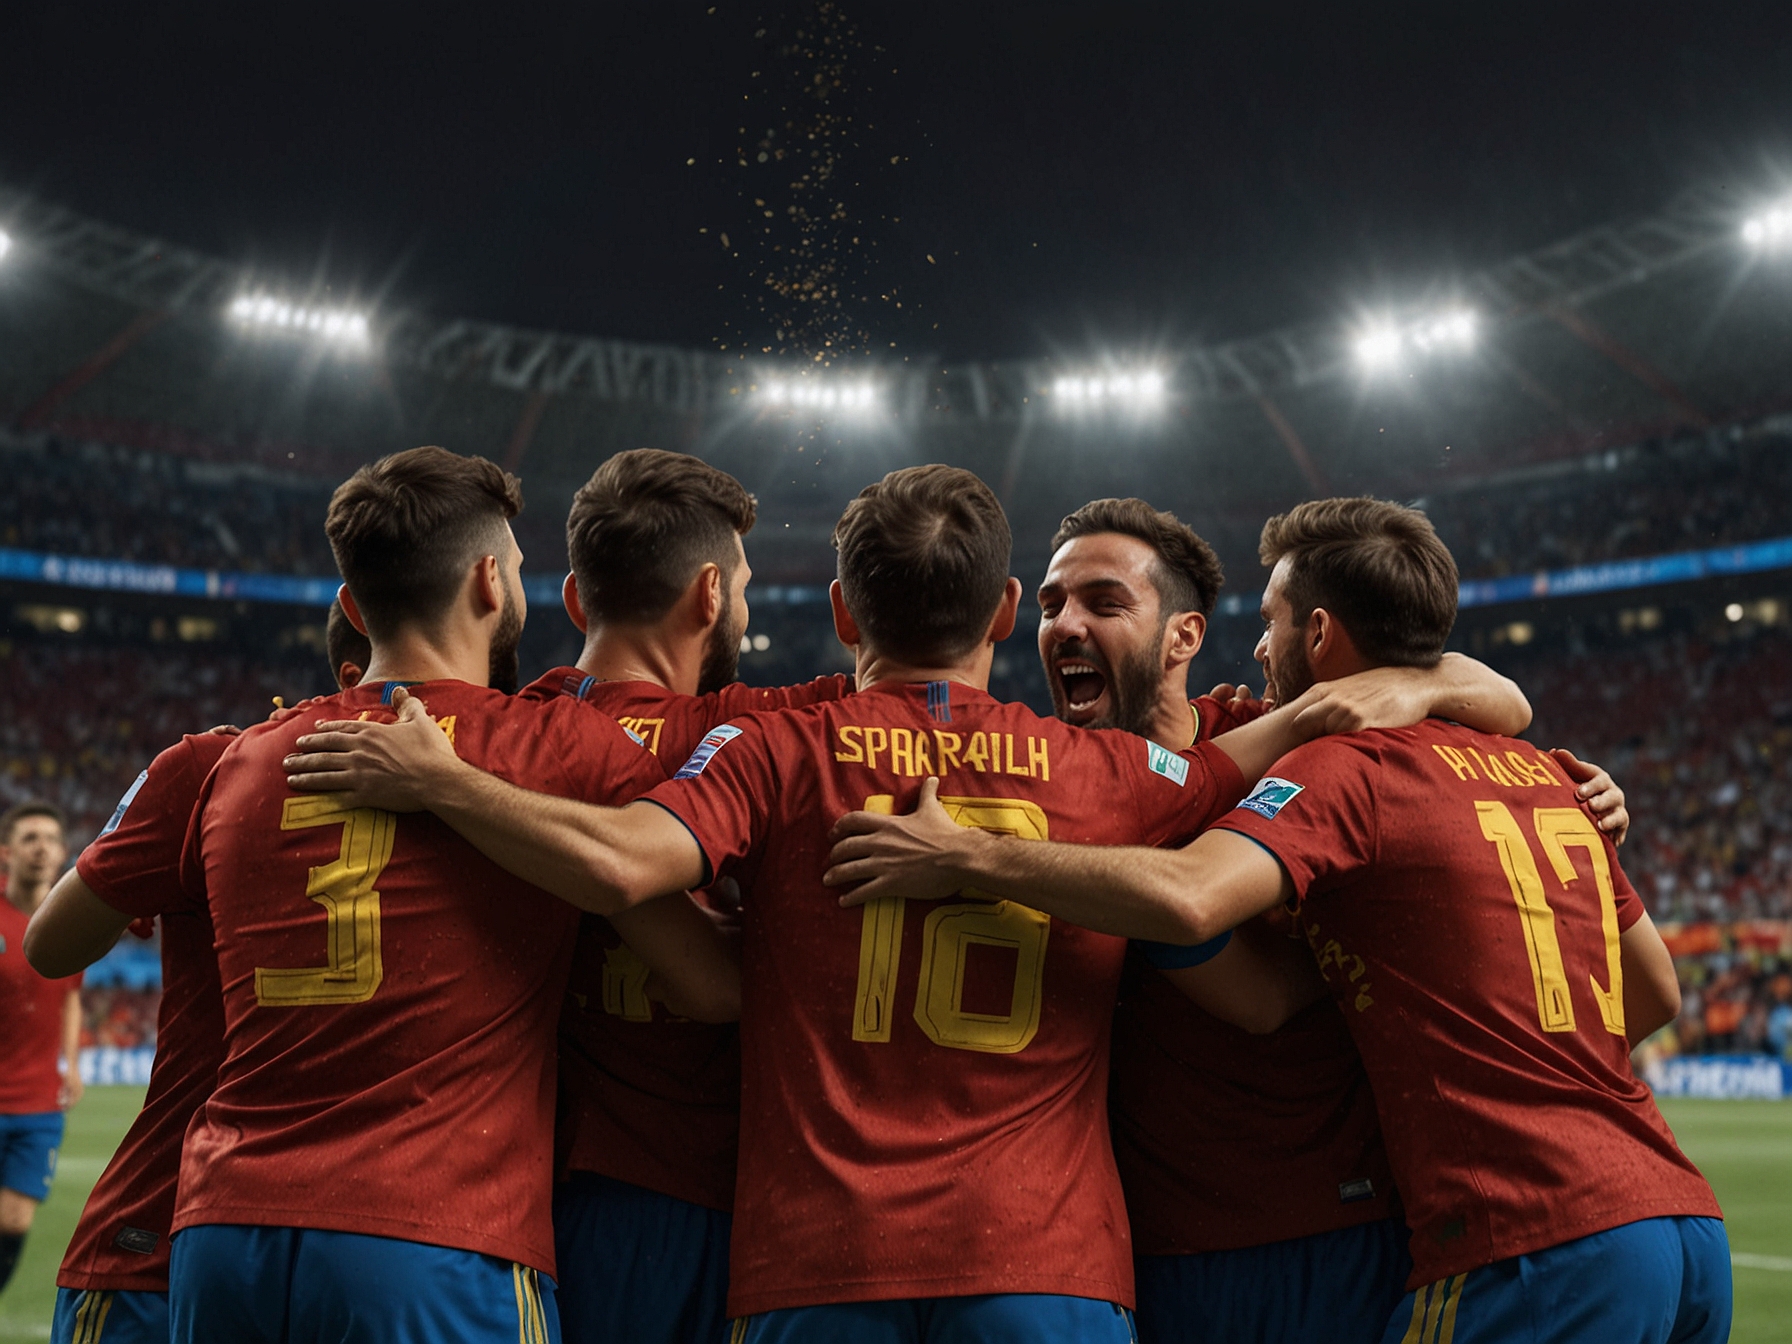 Spain's players celebrate their narrow 1-0 victory over Italy, solidifying their place in the last 16 of Euro 2024. The image captures the ecstatic moment following their decisive goal in the first half.